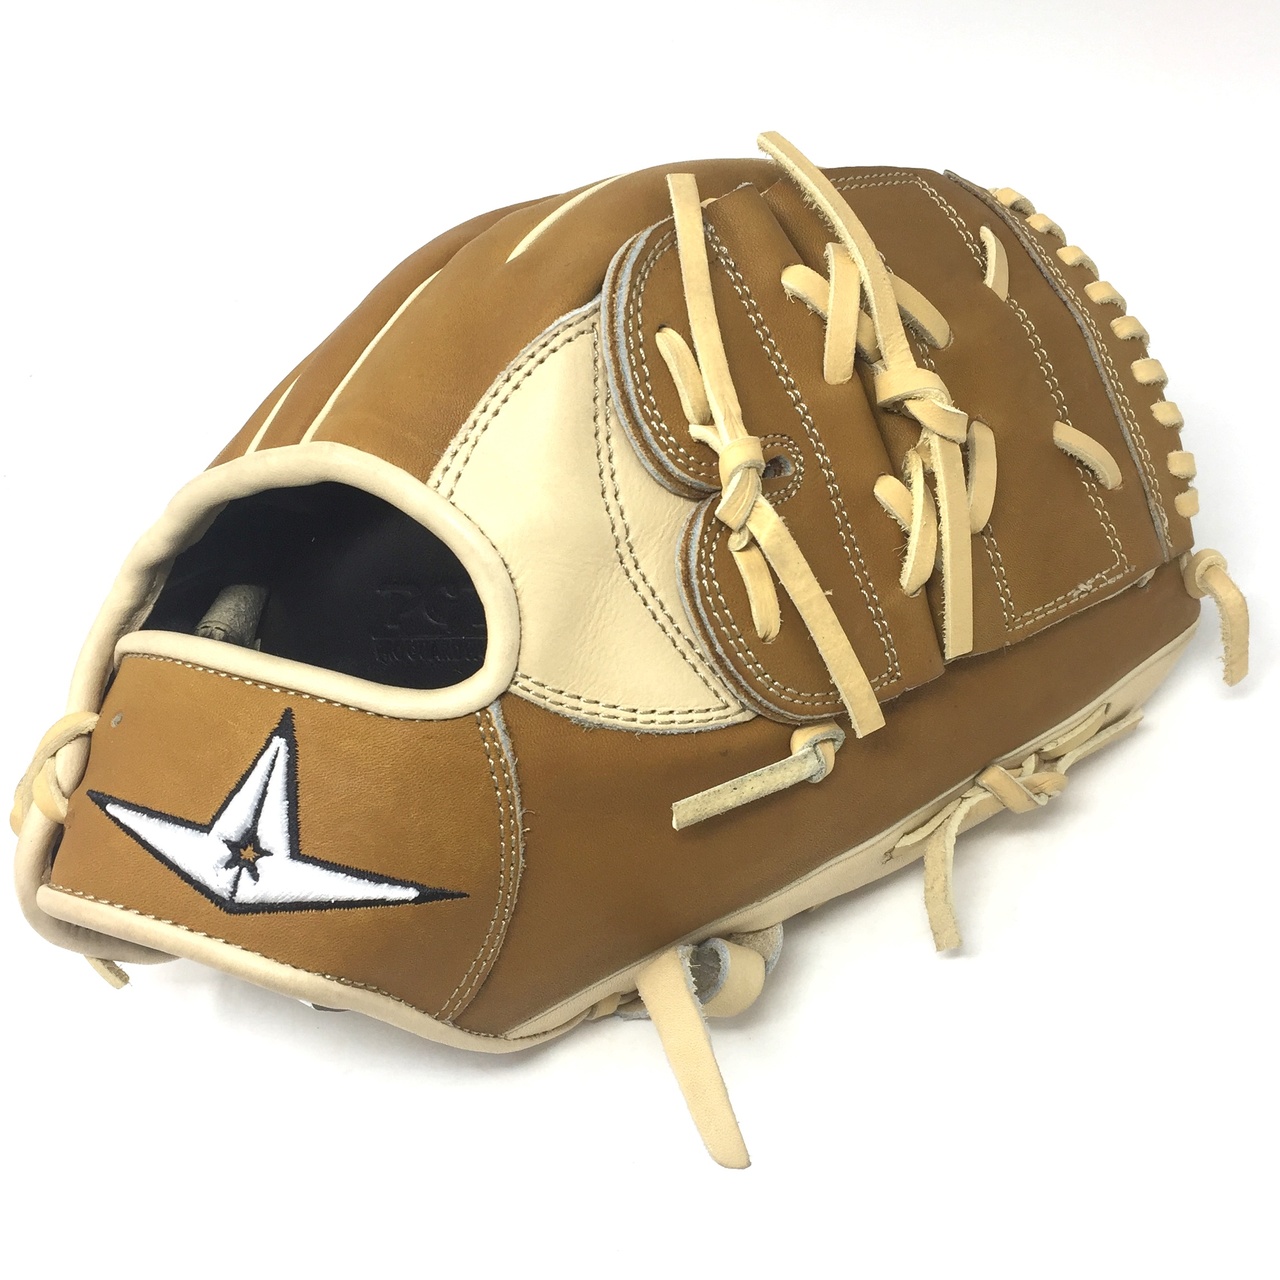 What makes Pro Elite the most trusted mitt behind the dish can now be had all across the diamond. A natural addition to baseball’s most preferred line of catcher’s mitts, Pro Elite fielding gloves provide premium level materials, patterns, and feel for all positions. Exclusive Japanese tanned steer hide delivers a fast, custom break-in with professional level durability and performance. The world-class, Pittard’s leather palm lining delivers a buttery soft feel making the glove feel like a natural extension of the hand. - 12 Inch Model - Closed Web - Conventional Open Back - Professional Grade, Japanese Tanned Leather - Rolled Welting for longer lasting shape and durability - World-class, Pittard’s leather palm lining - Easy Break-In - Long Lasting Durability.